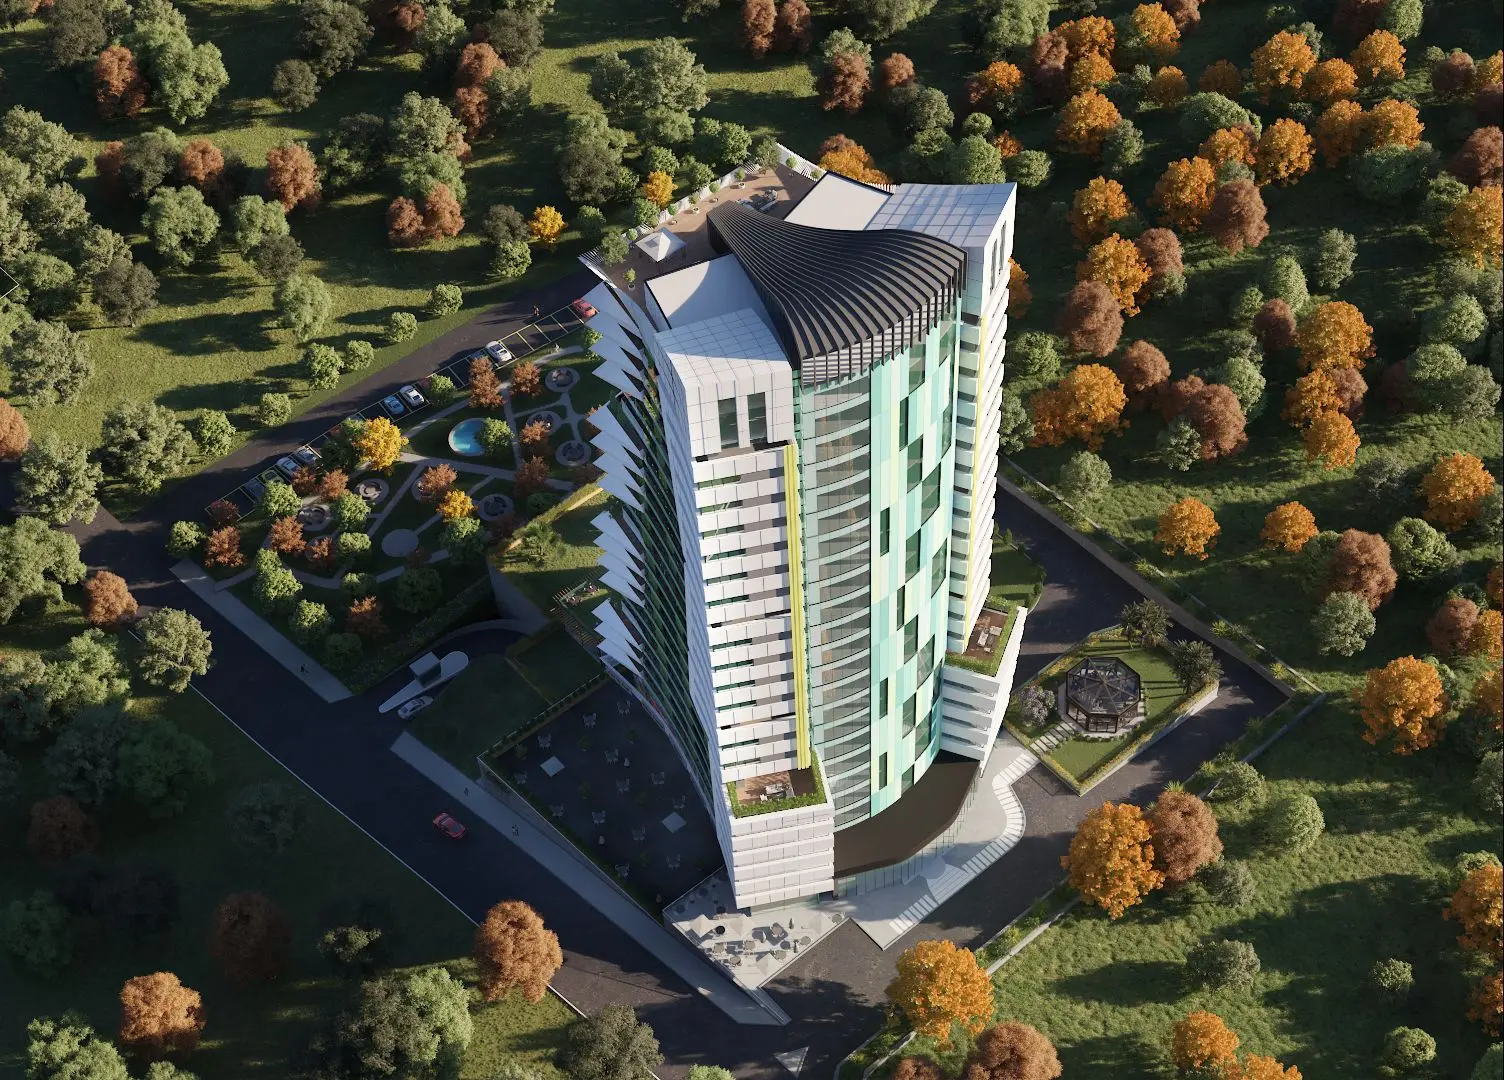 A PERFECT PROJECT WHERE YOU CAN WORK AND LIVE IN ISTANBUL